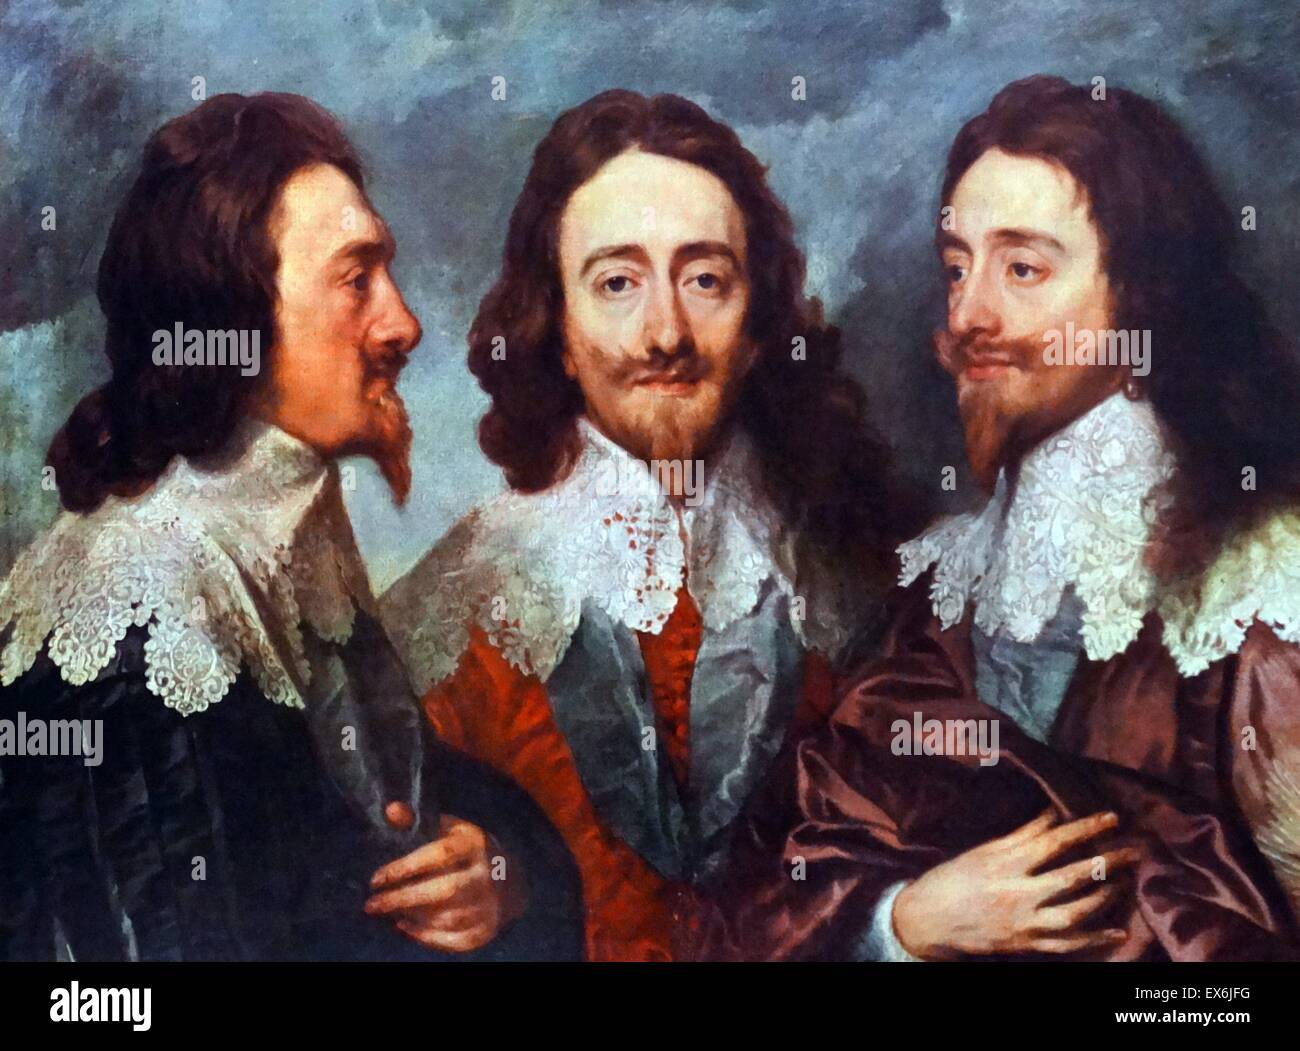 King Charles I. Triple portrait by Van Dyck. From The Island Race, a 20th century book that covers the history of the British Isles from the pre-Roman times to the Victorian era. Written by Sir Winston Churchill and abridged by Timothy Baker. Stock Photo